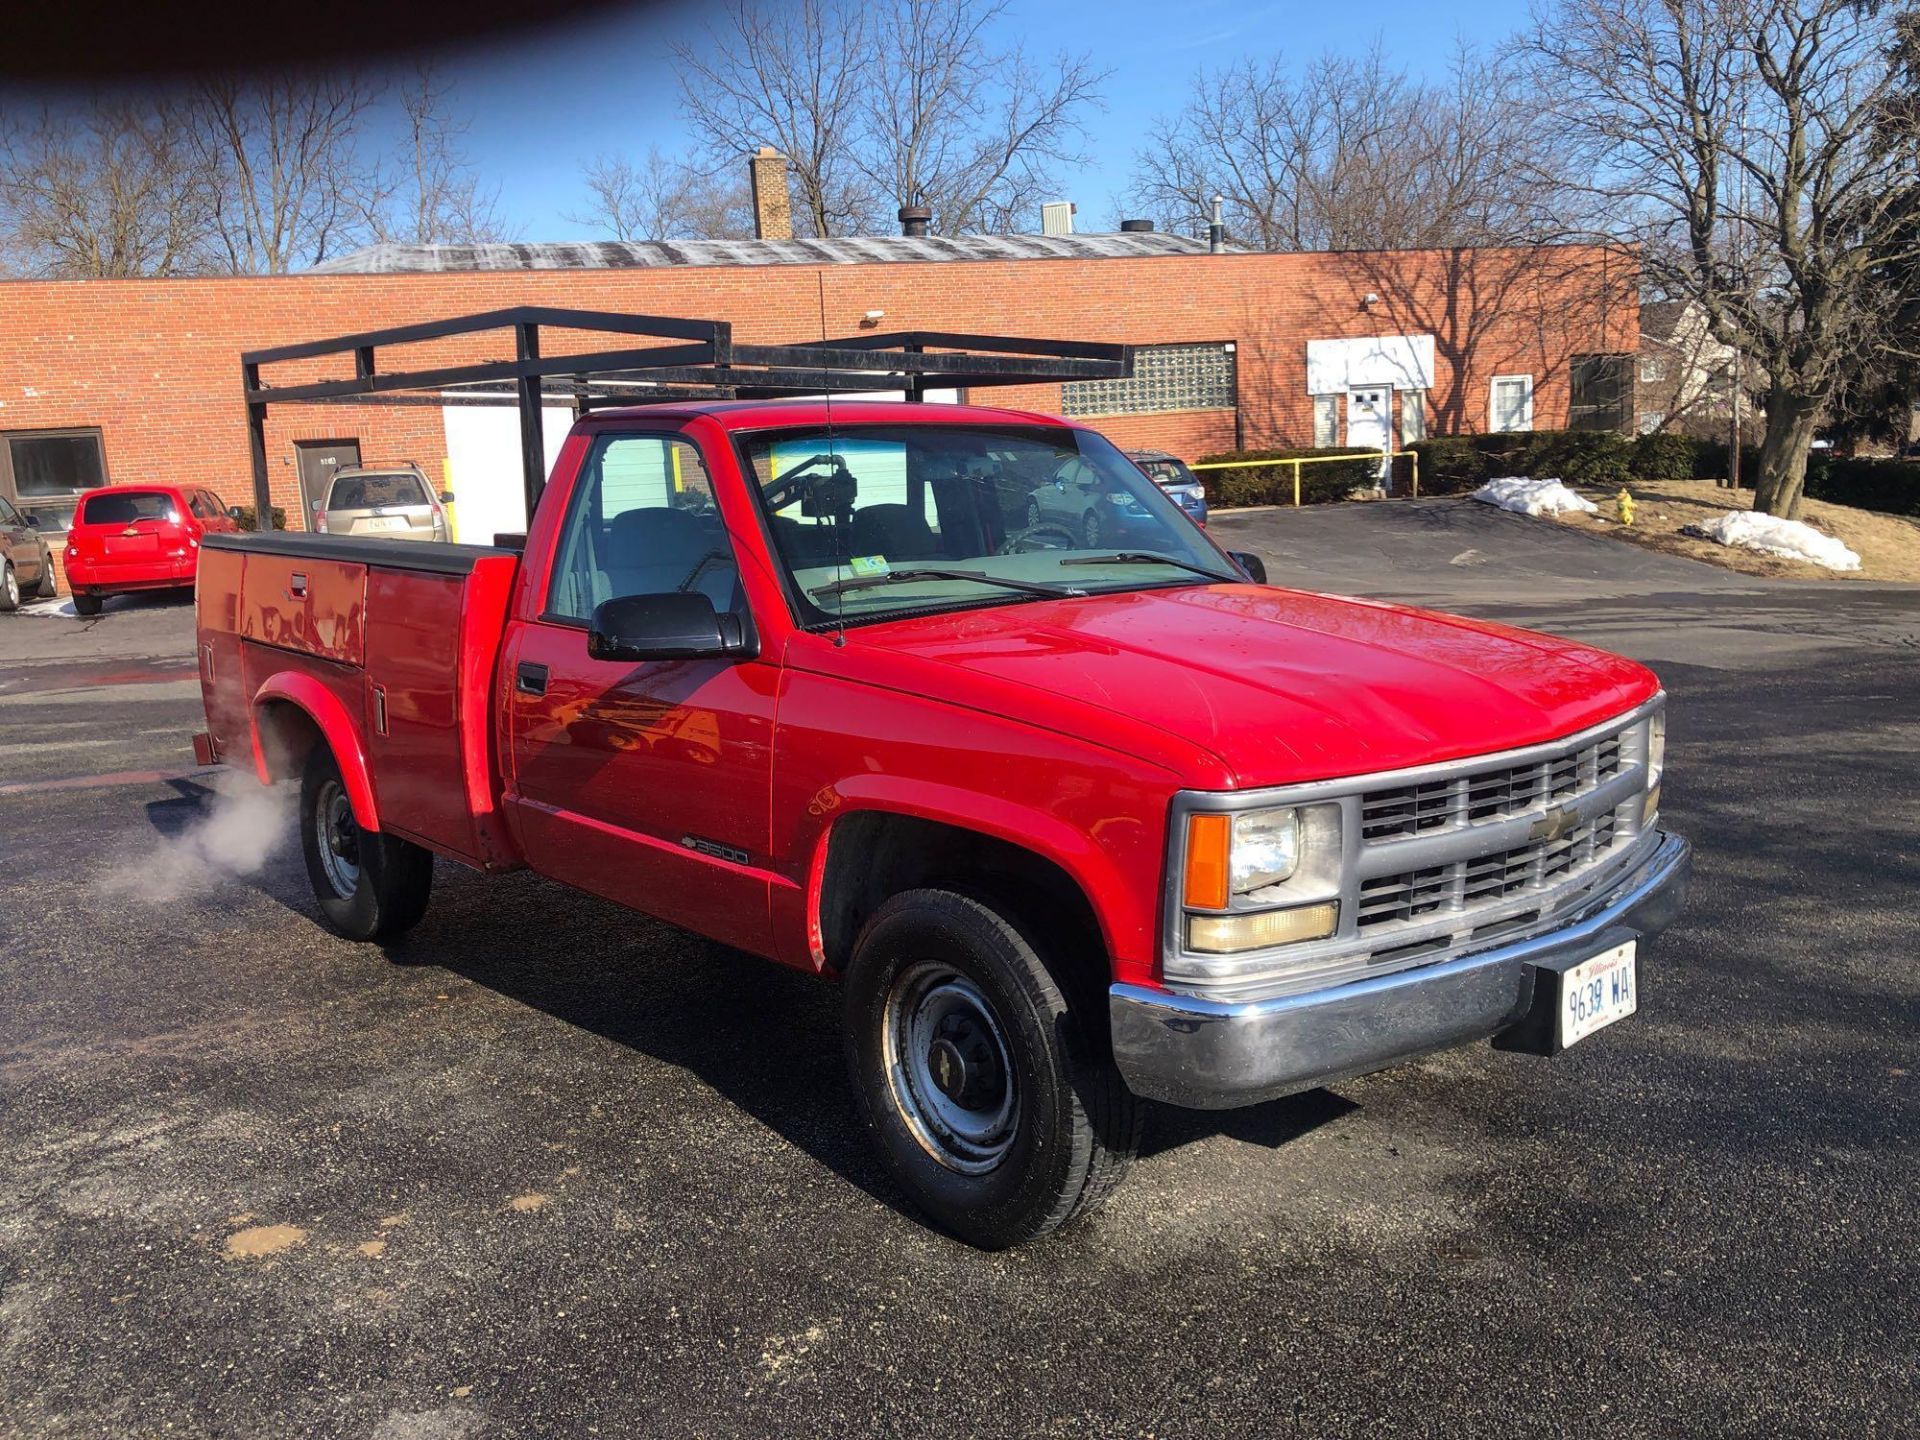 1999 GM Utility Truck with Slide Open Cap